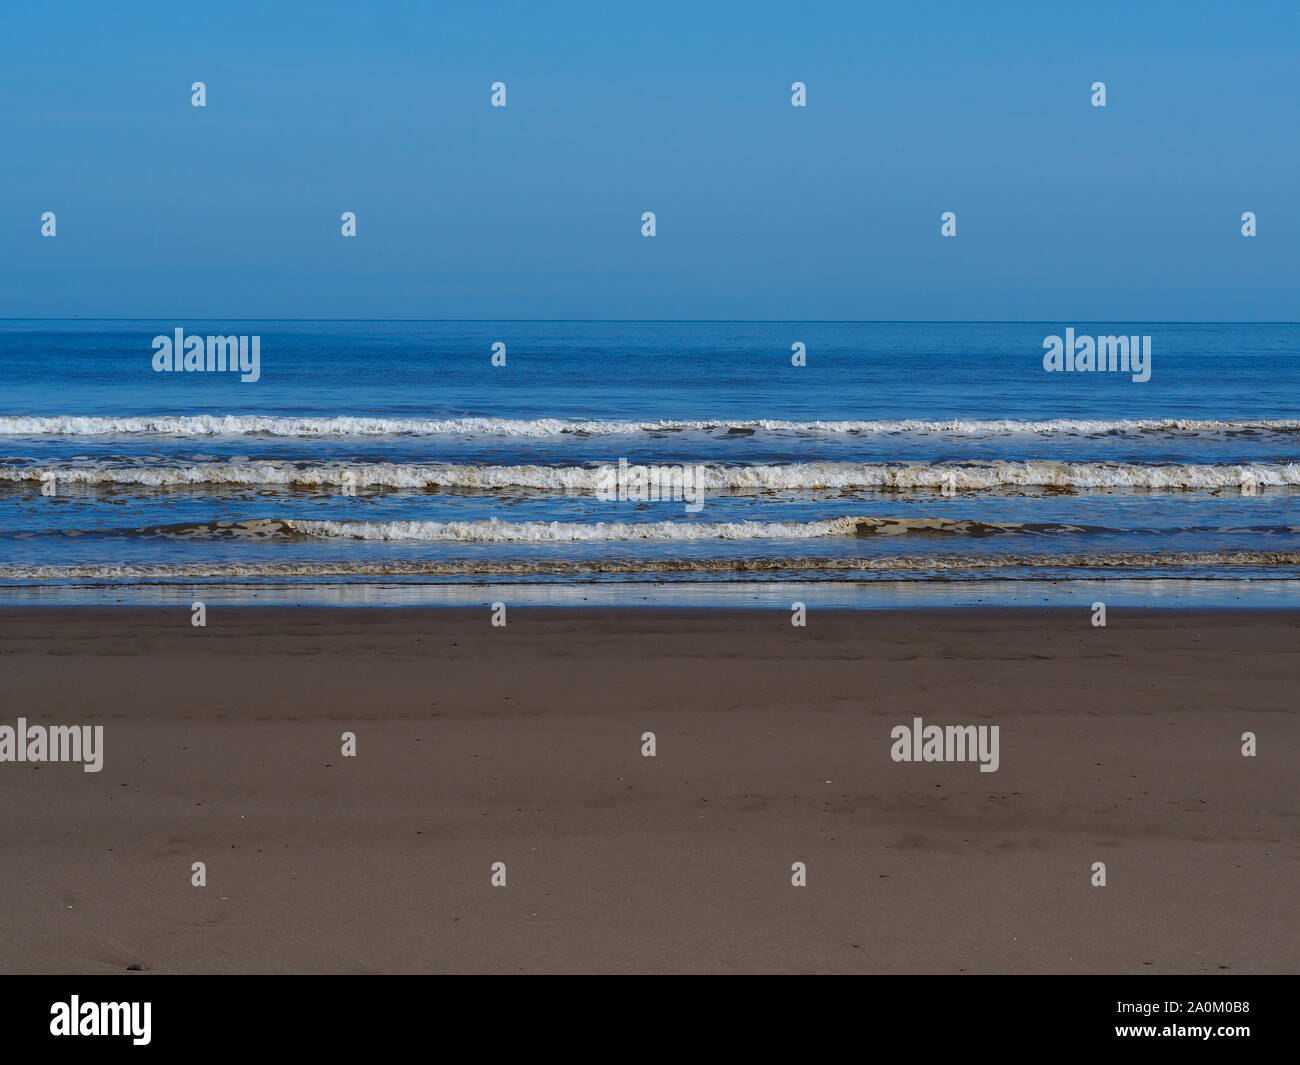 Waves with white surf approaching the sandy beach at Mablethorpe, Lincolnshire, England, on a beautiful summer day Stock Photo